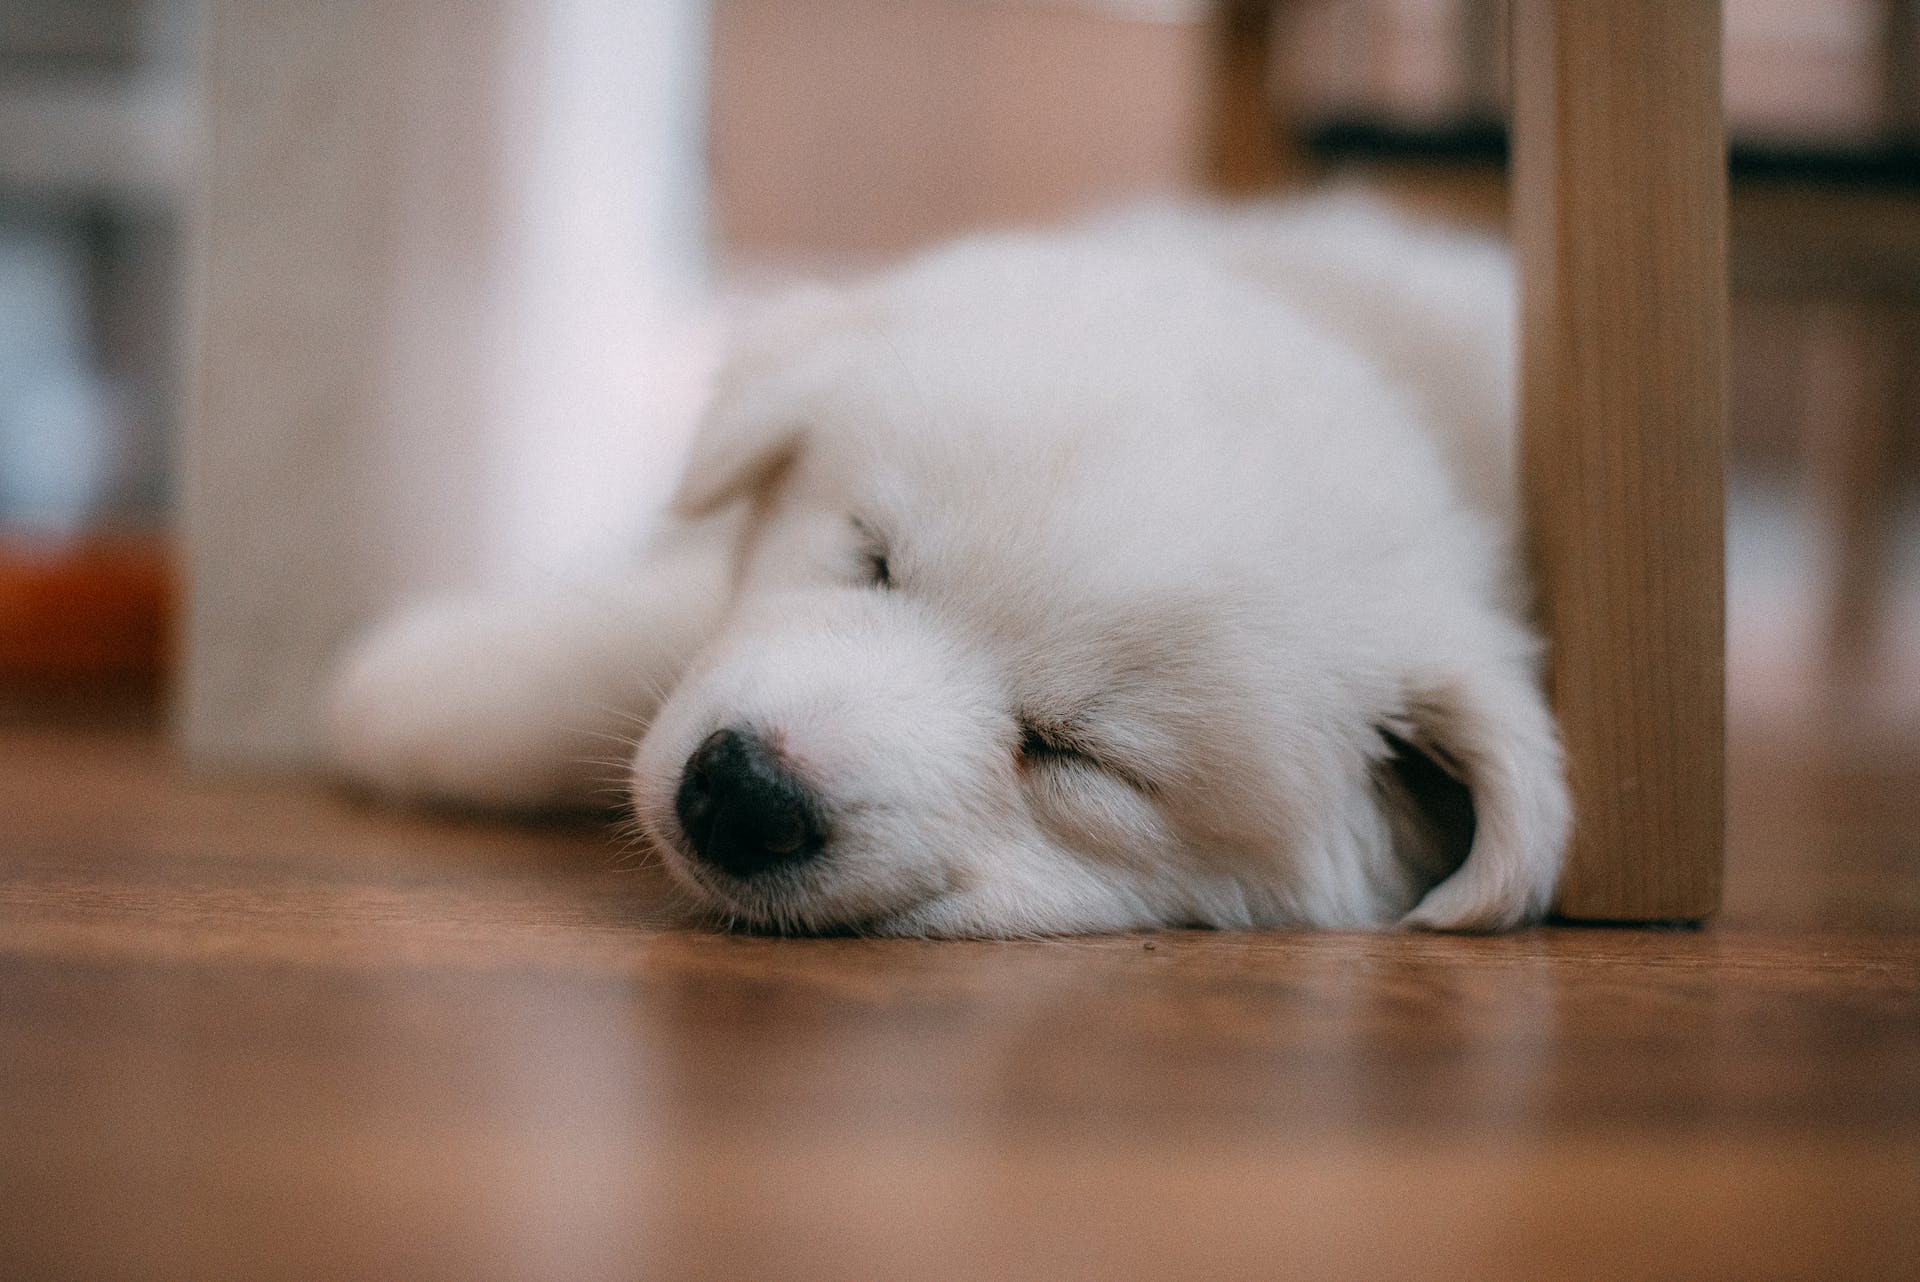 A puppy sleeping under a table